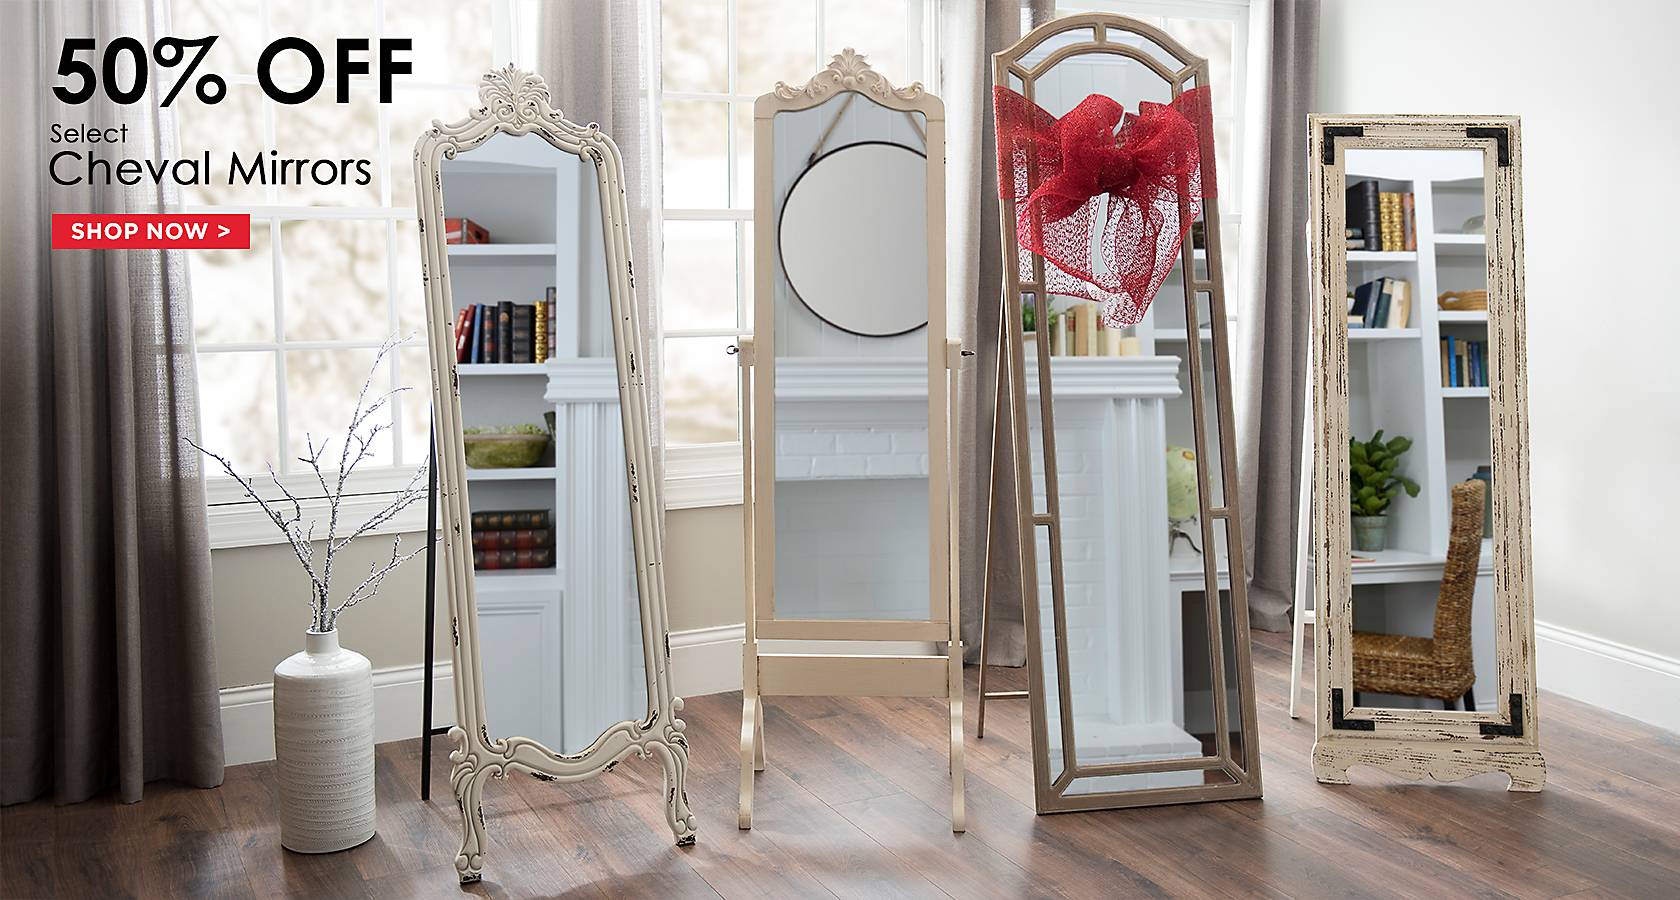 50% Off Select Cheval Mirrors - Shop Now